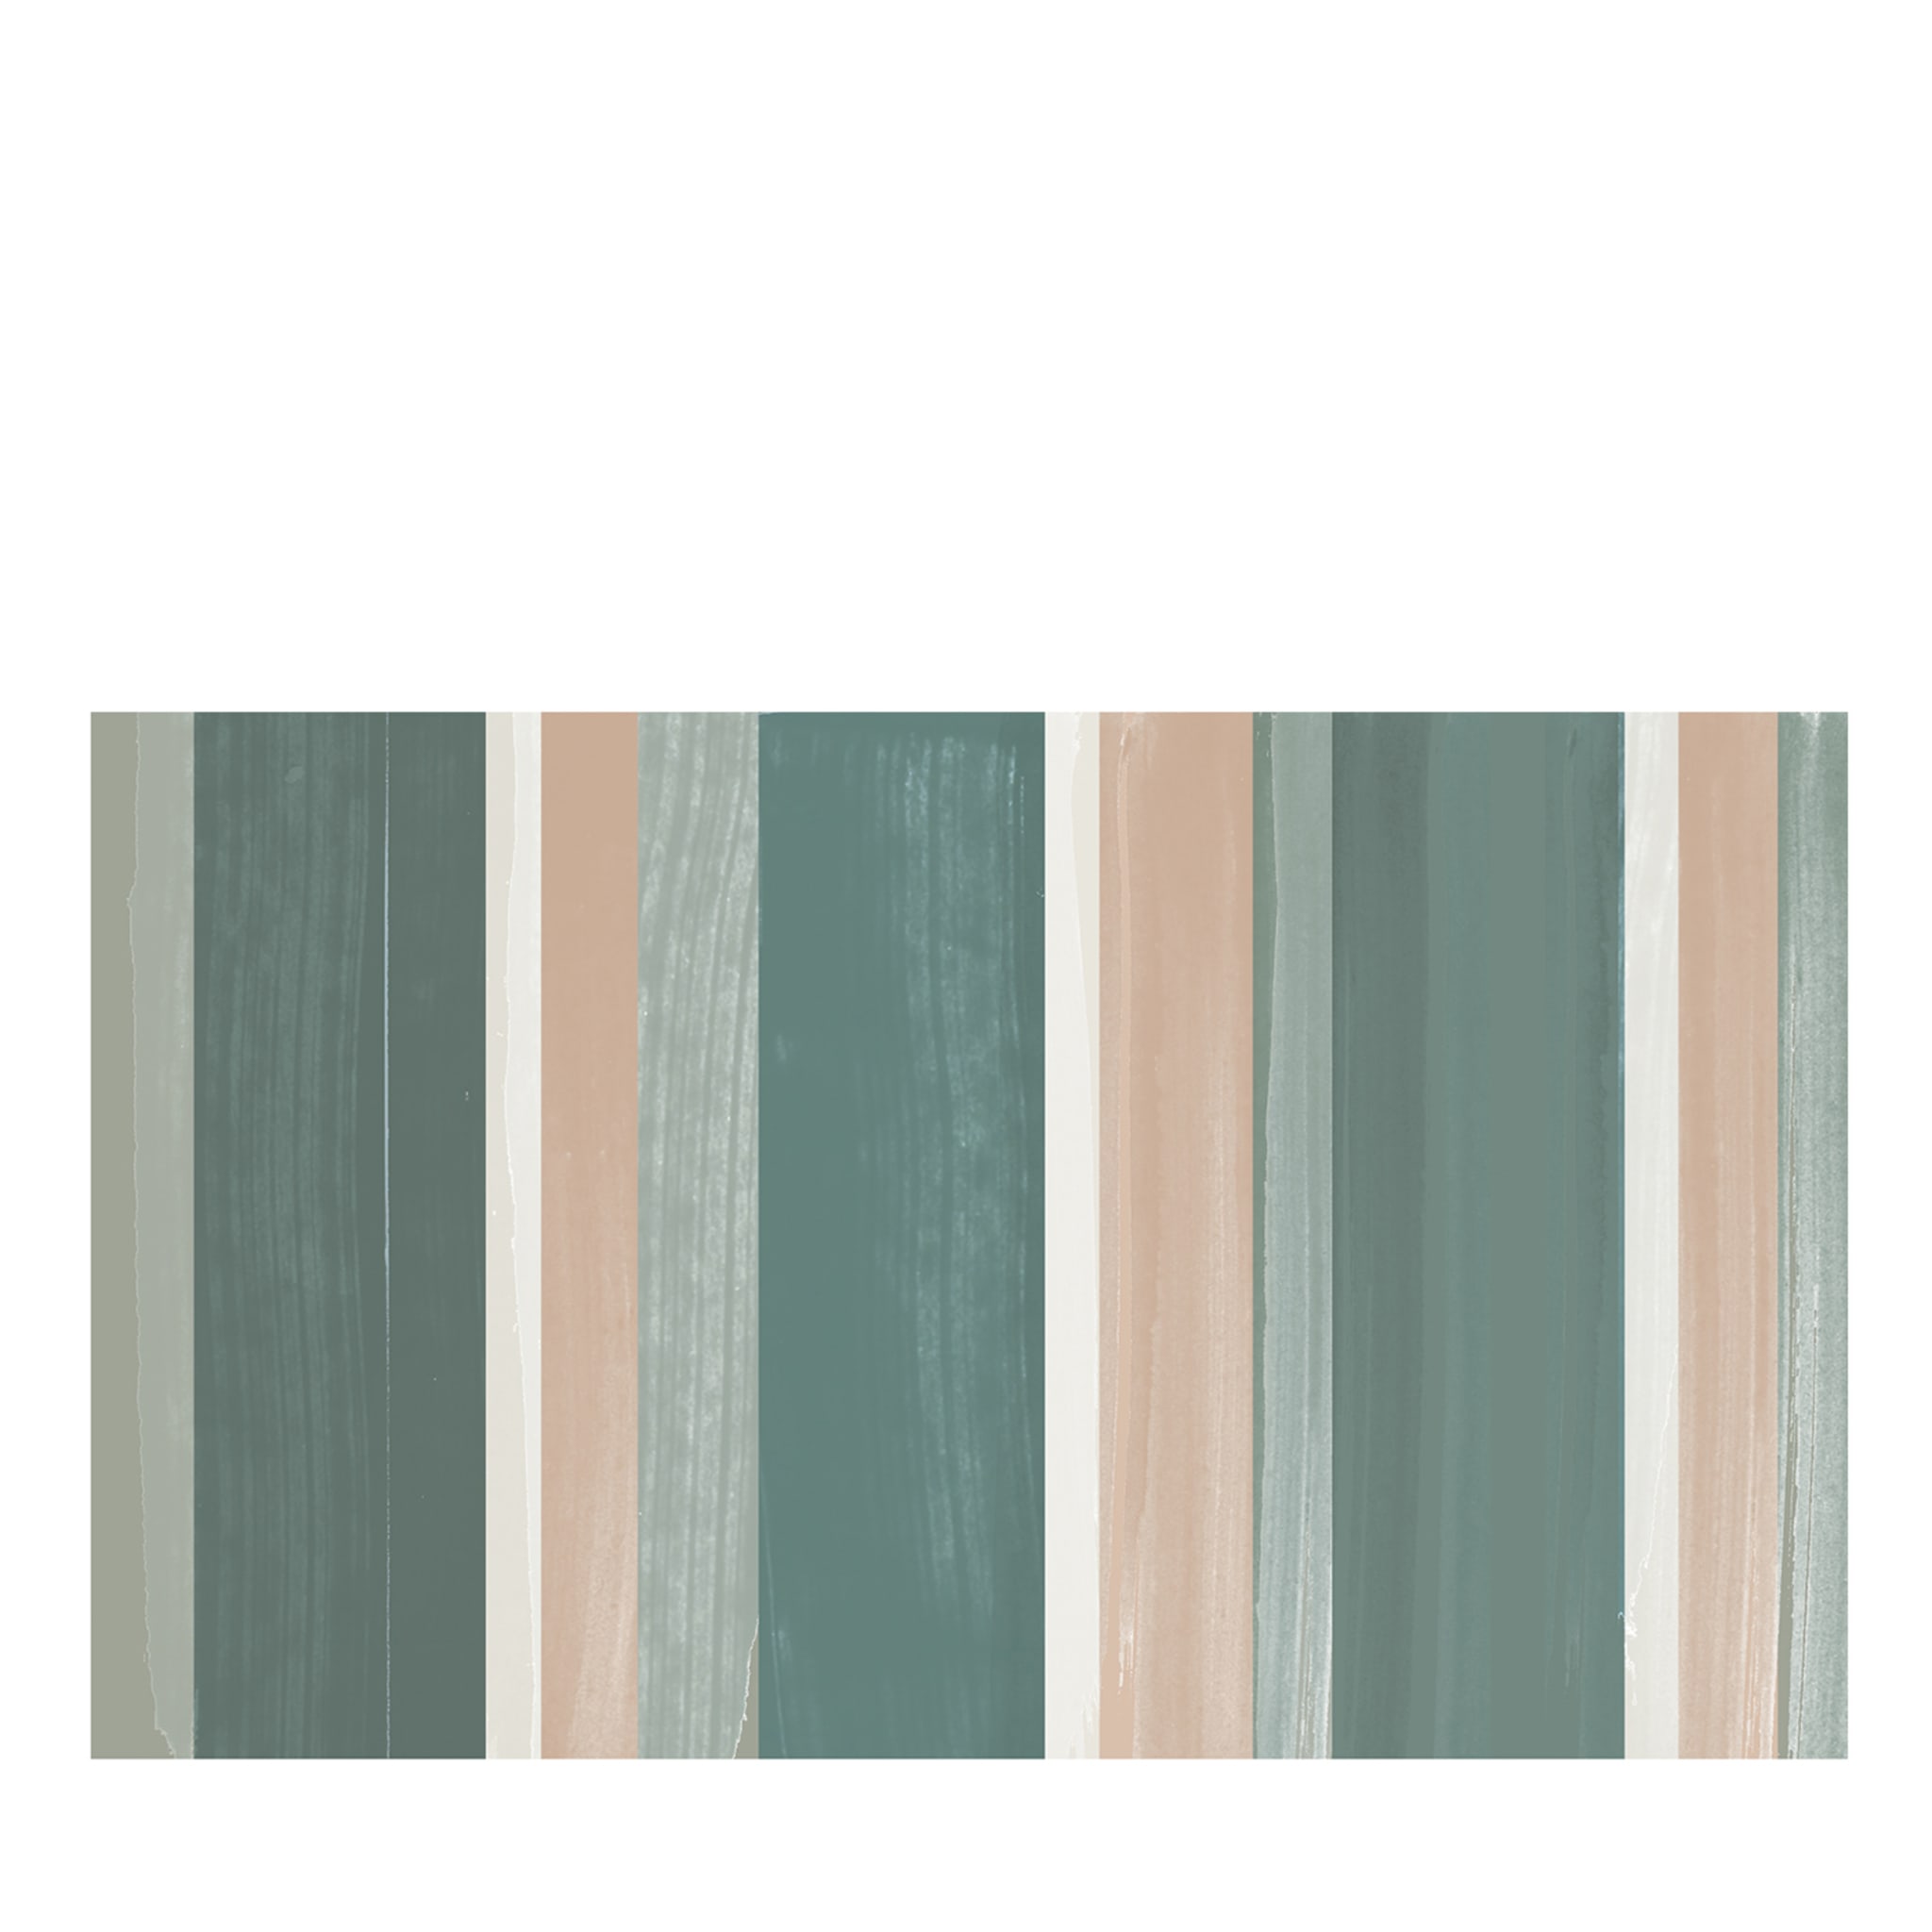 Brushed Stripes by Giulia Strizzi wallpaper#1 - Main view